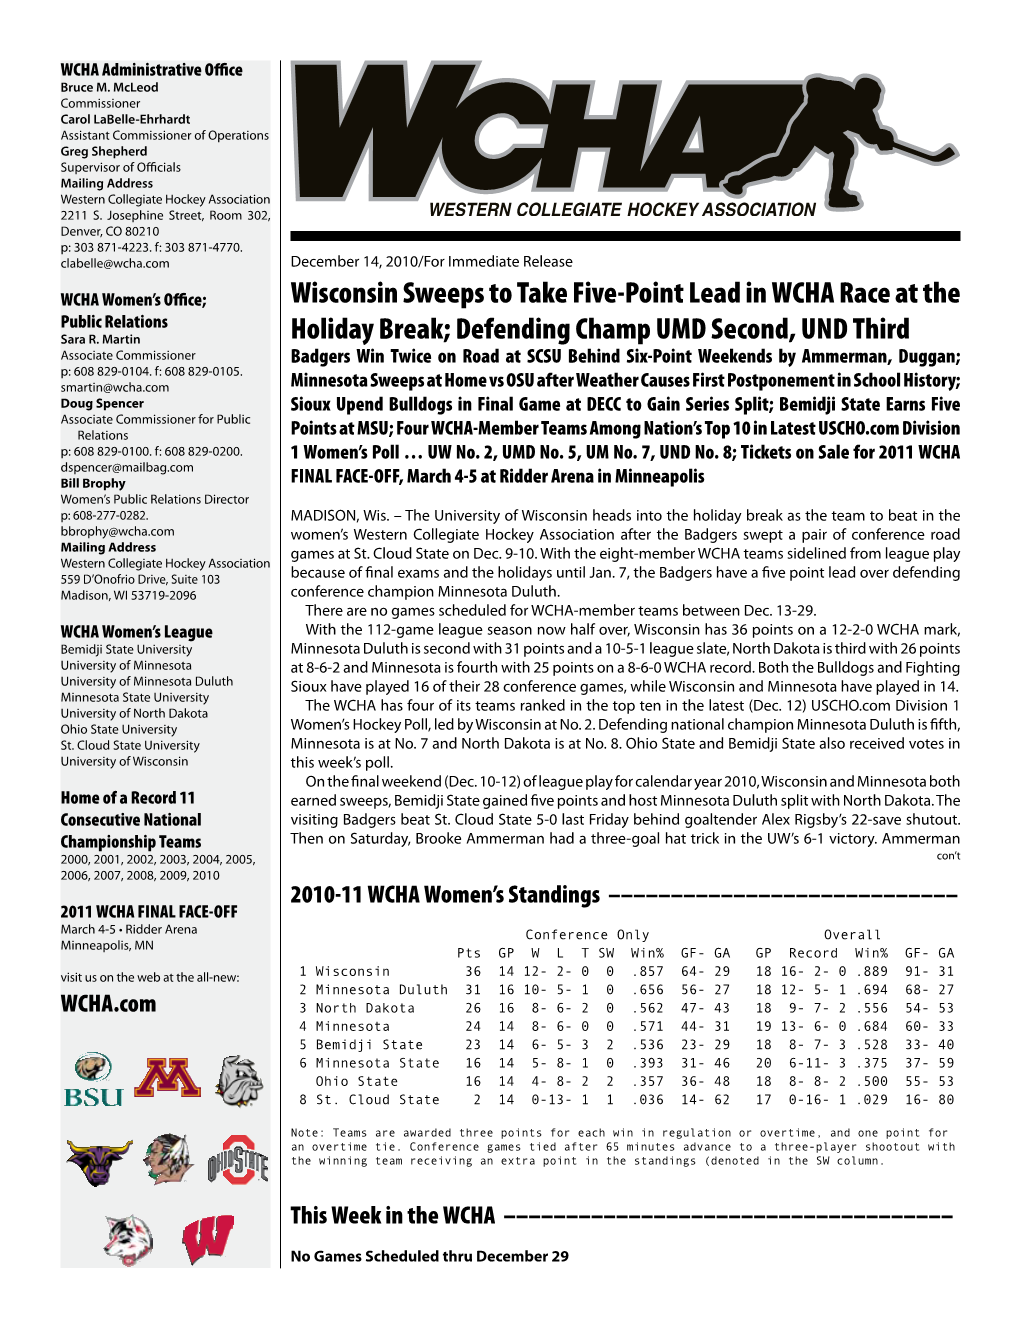 Wisconsin Sweeps to Take Five-Point Lead in WCHA Race at the Holiday